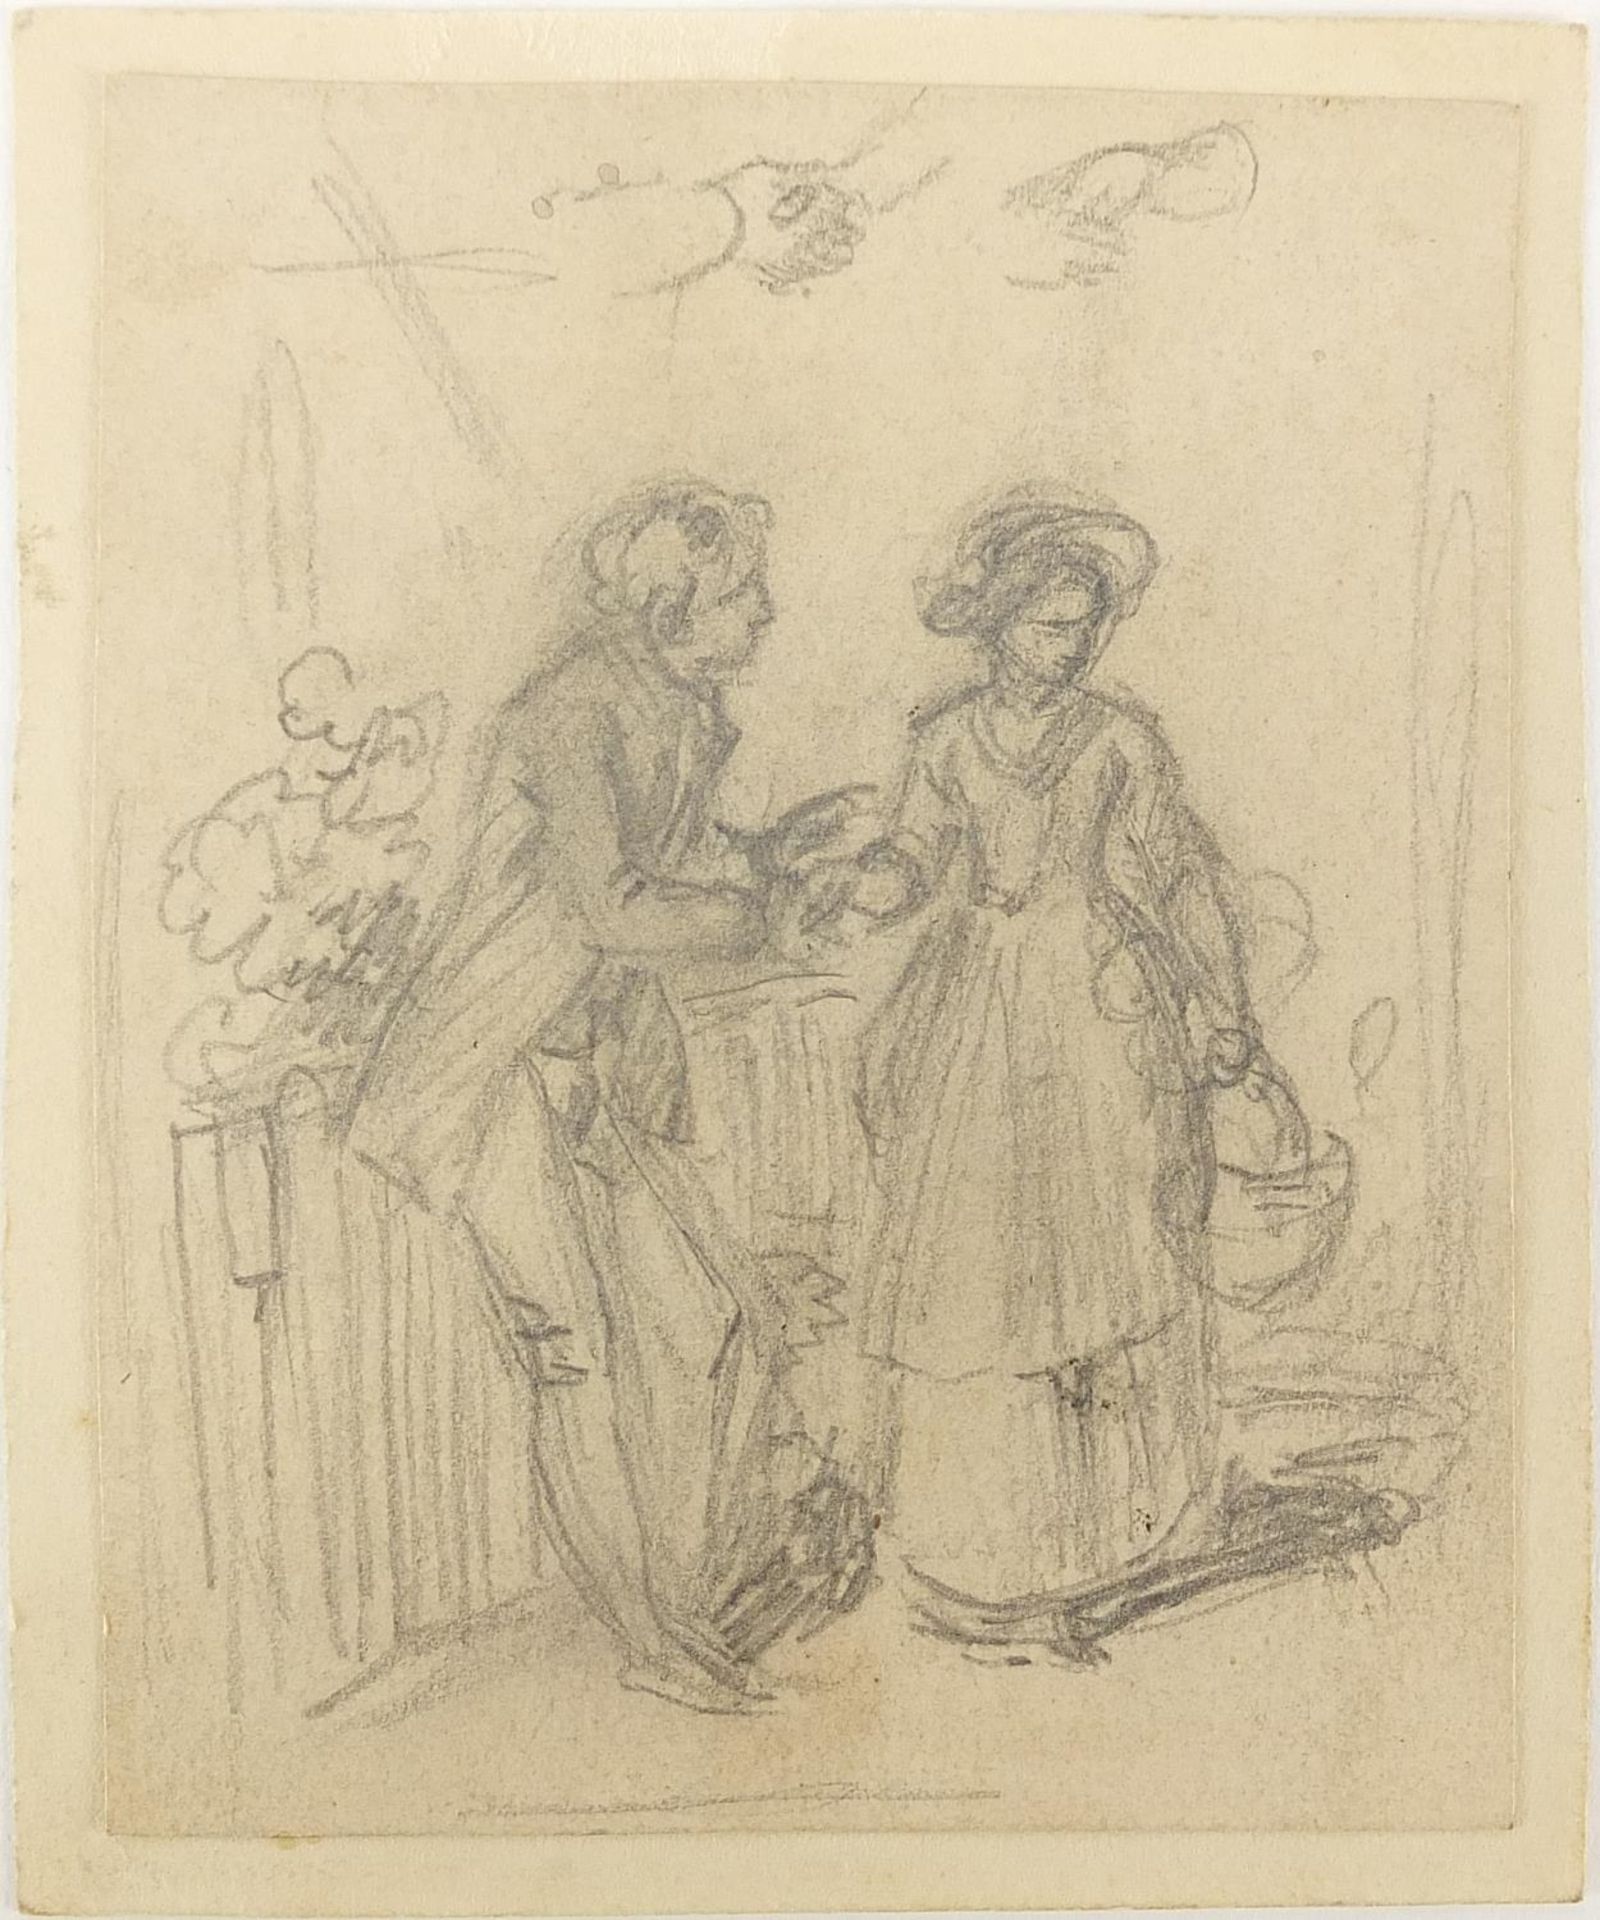 Manner of Joseph Wright of Derby - Study of a lady and gentleman, antique pencil drawing on paper, - Image 2 of 3